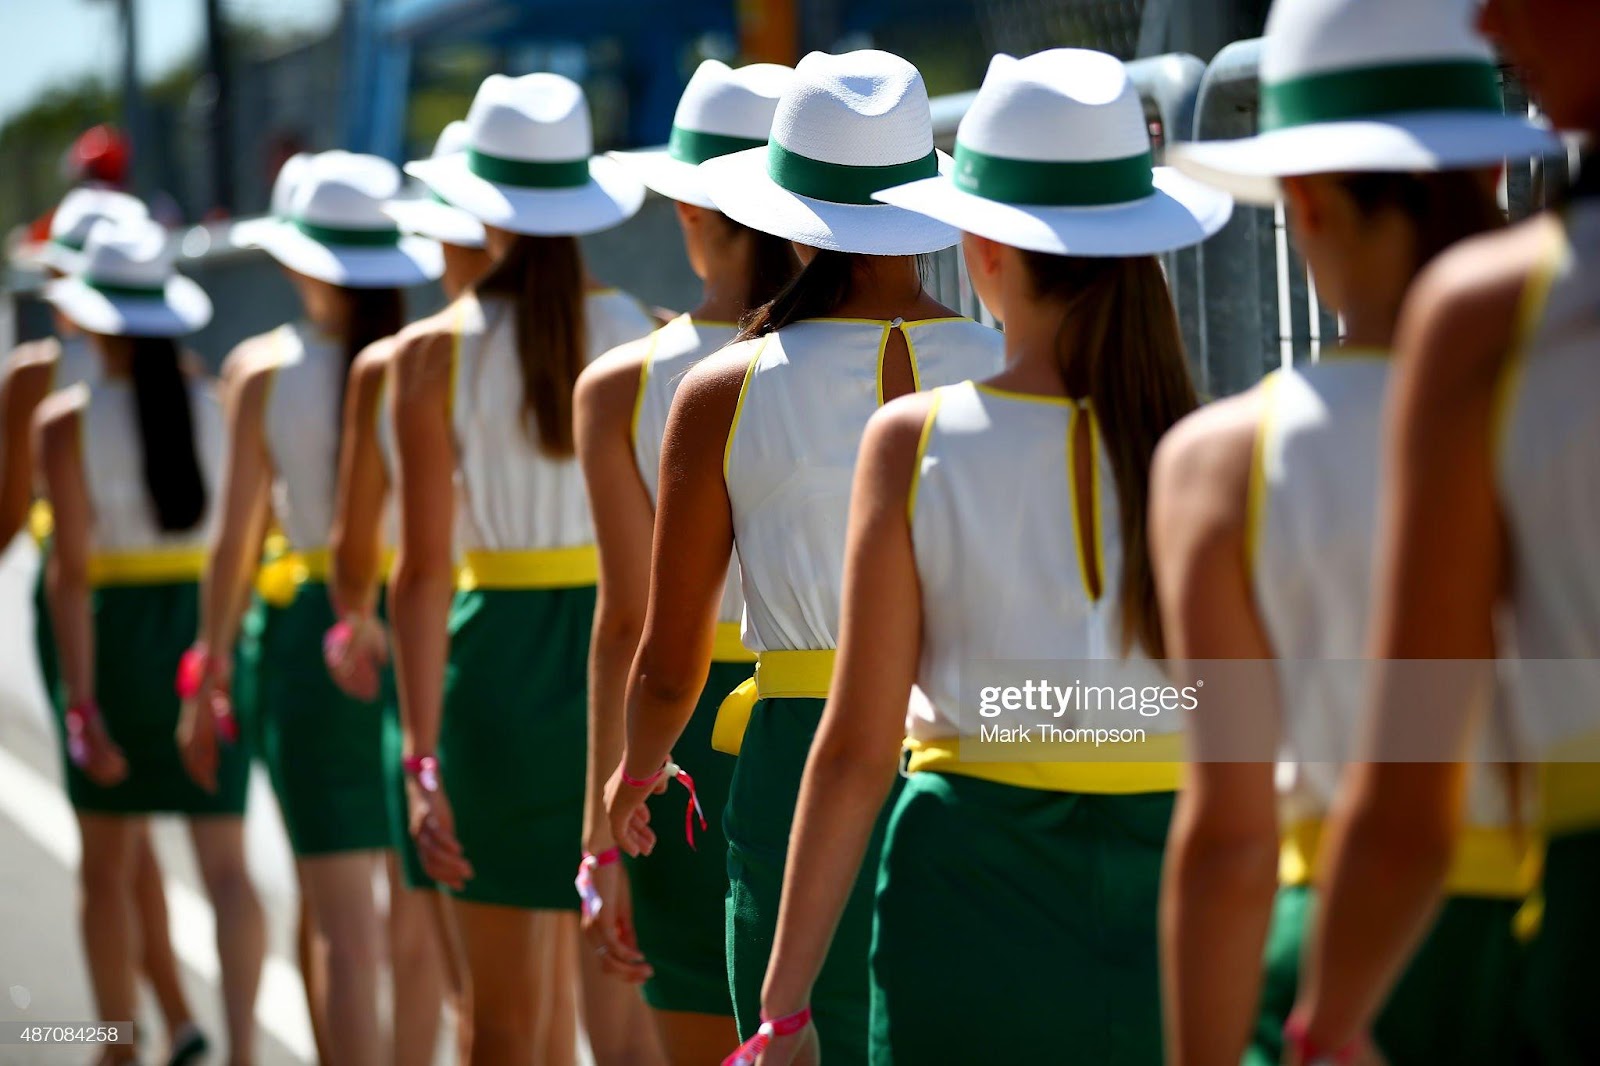 D:\Documenti\posts\posts\Women and motorsport\foto\Getty e altre\grid-girls-walk-to-the-drivers-parade-before-the-formula-one-grand-picture-id487084258.jpg